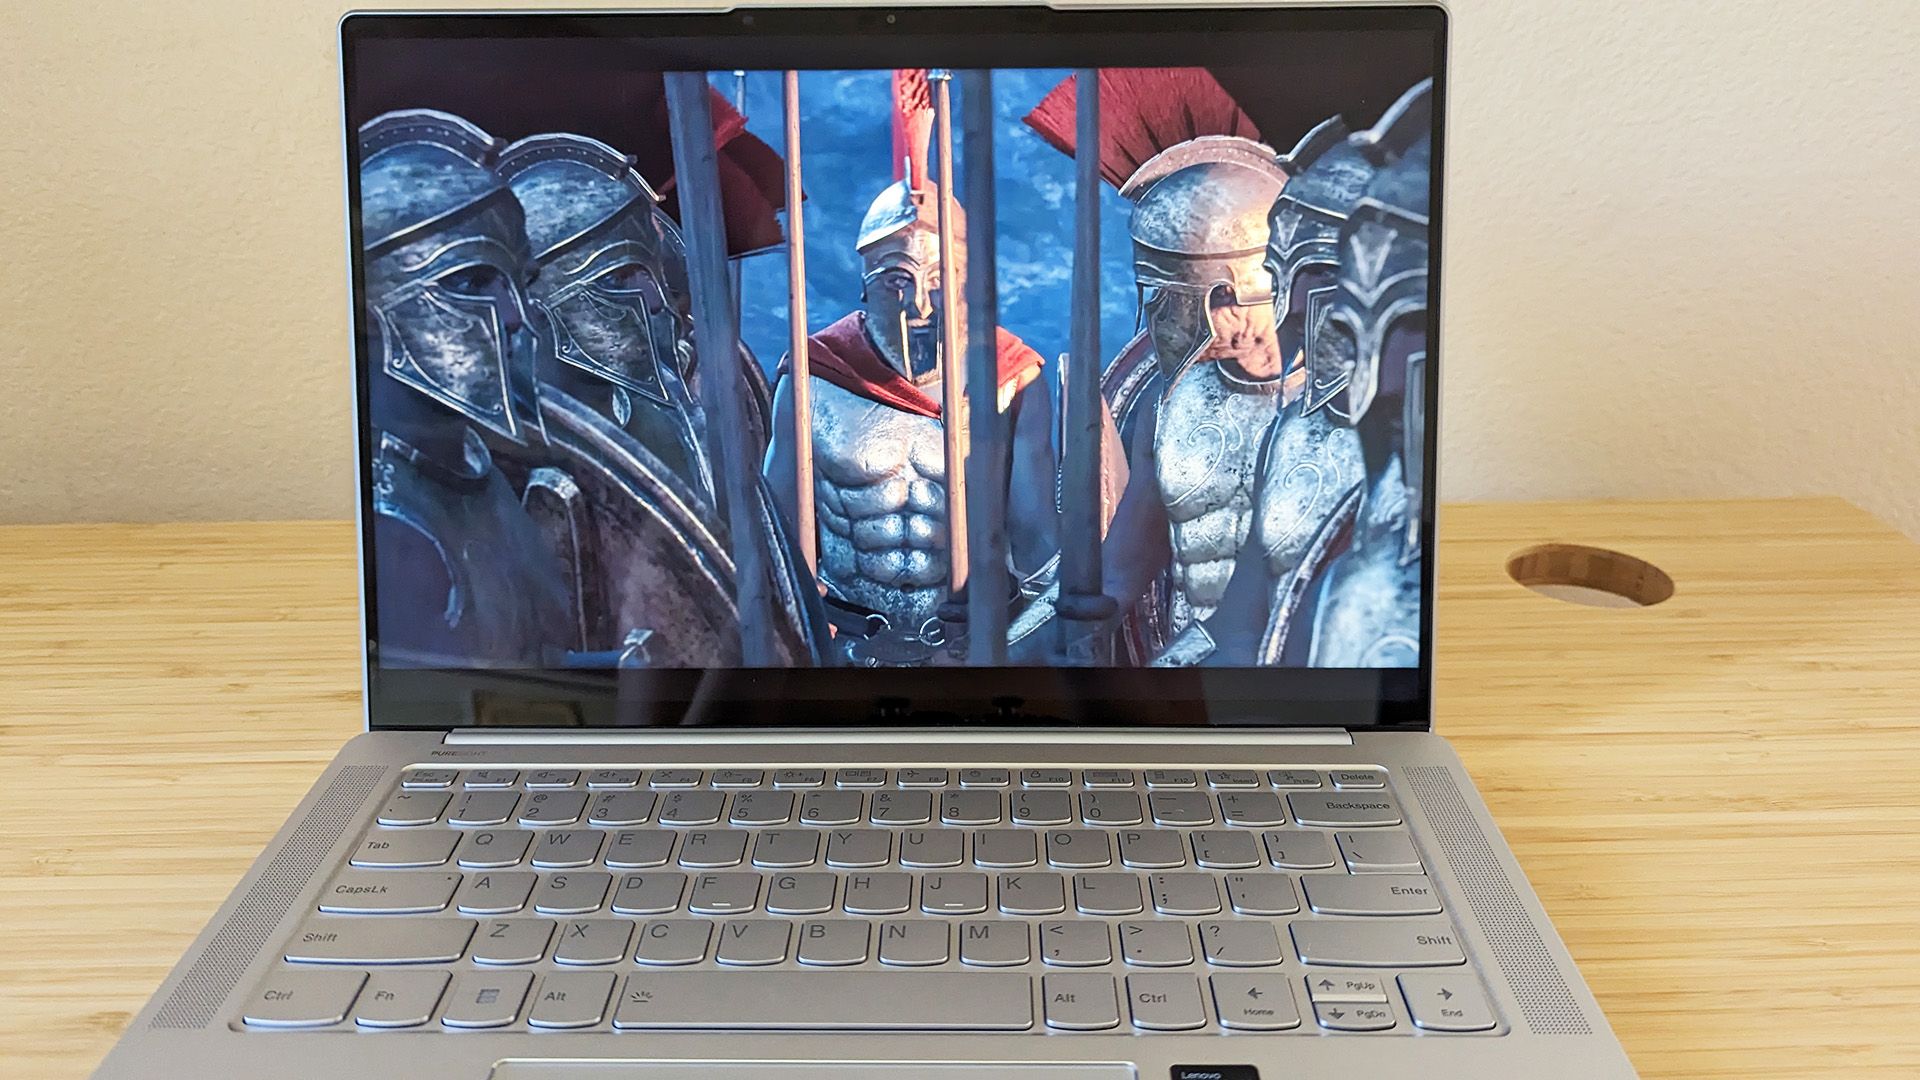 The Lenovo Slim 7i Pro X laptop with a game graphic on screen.